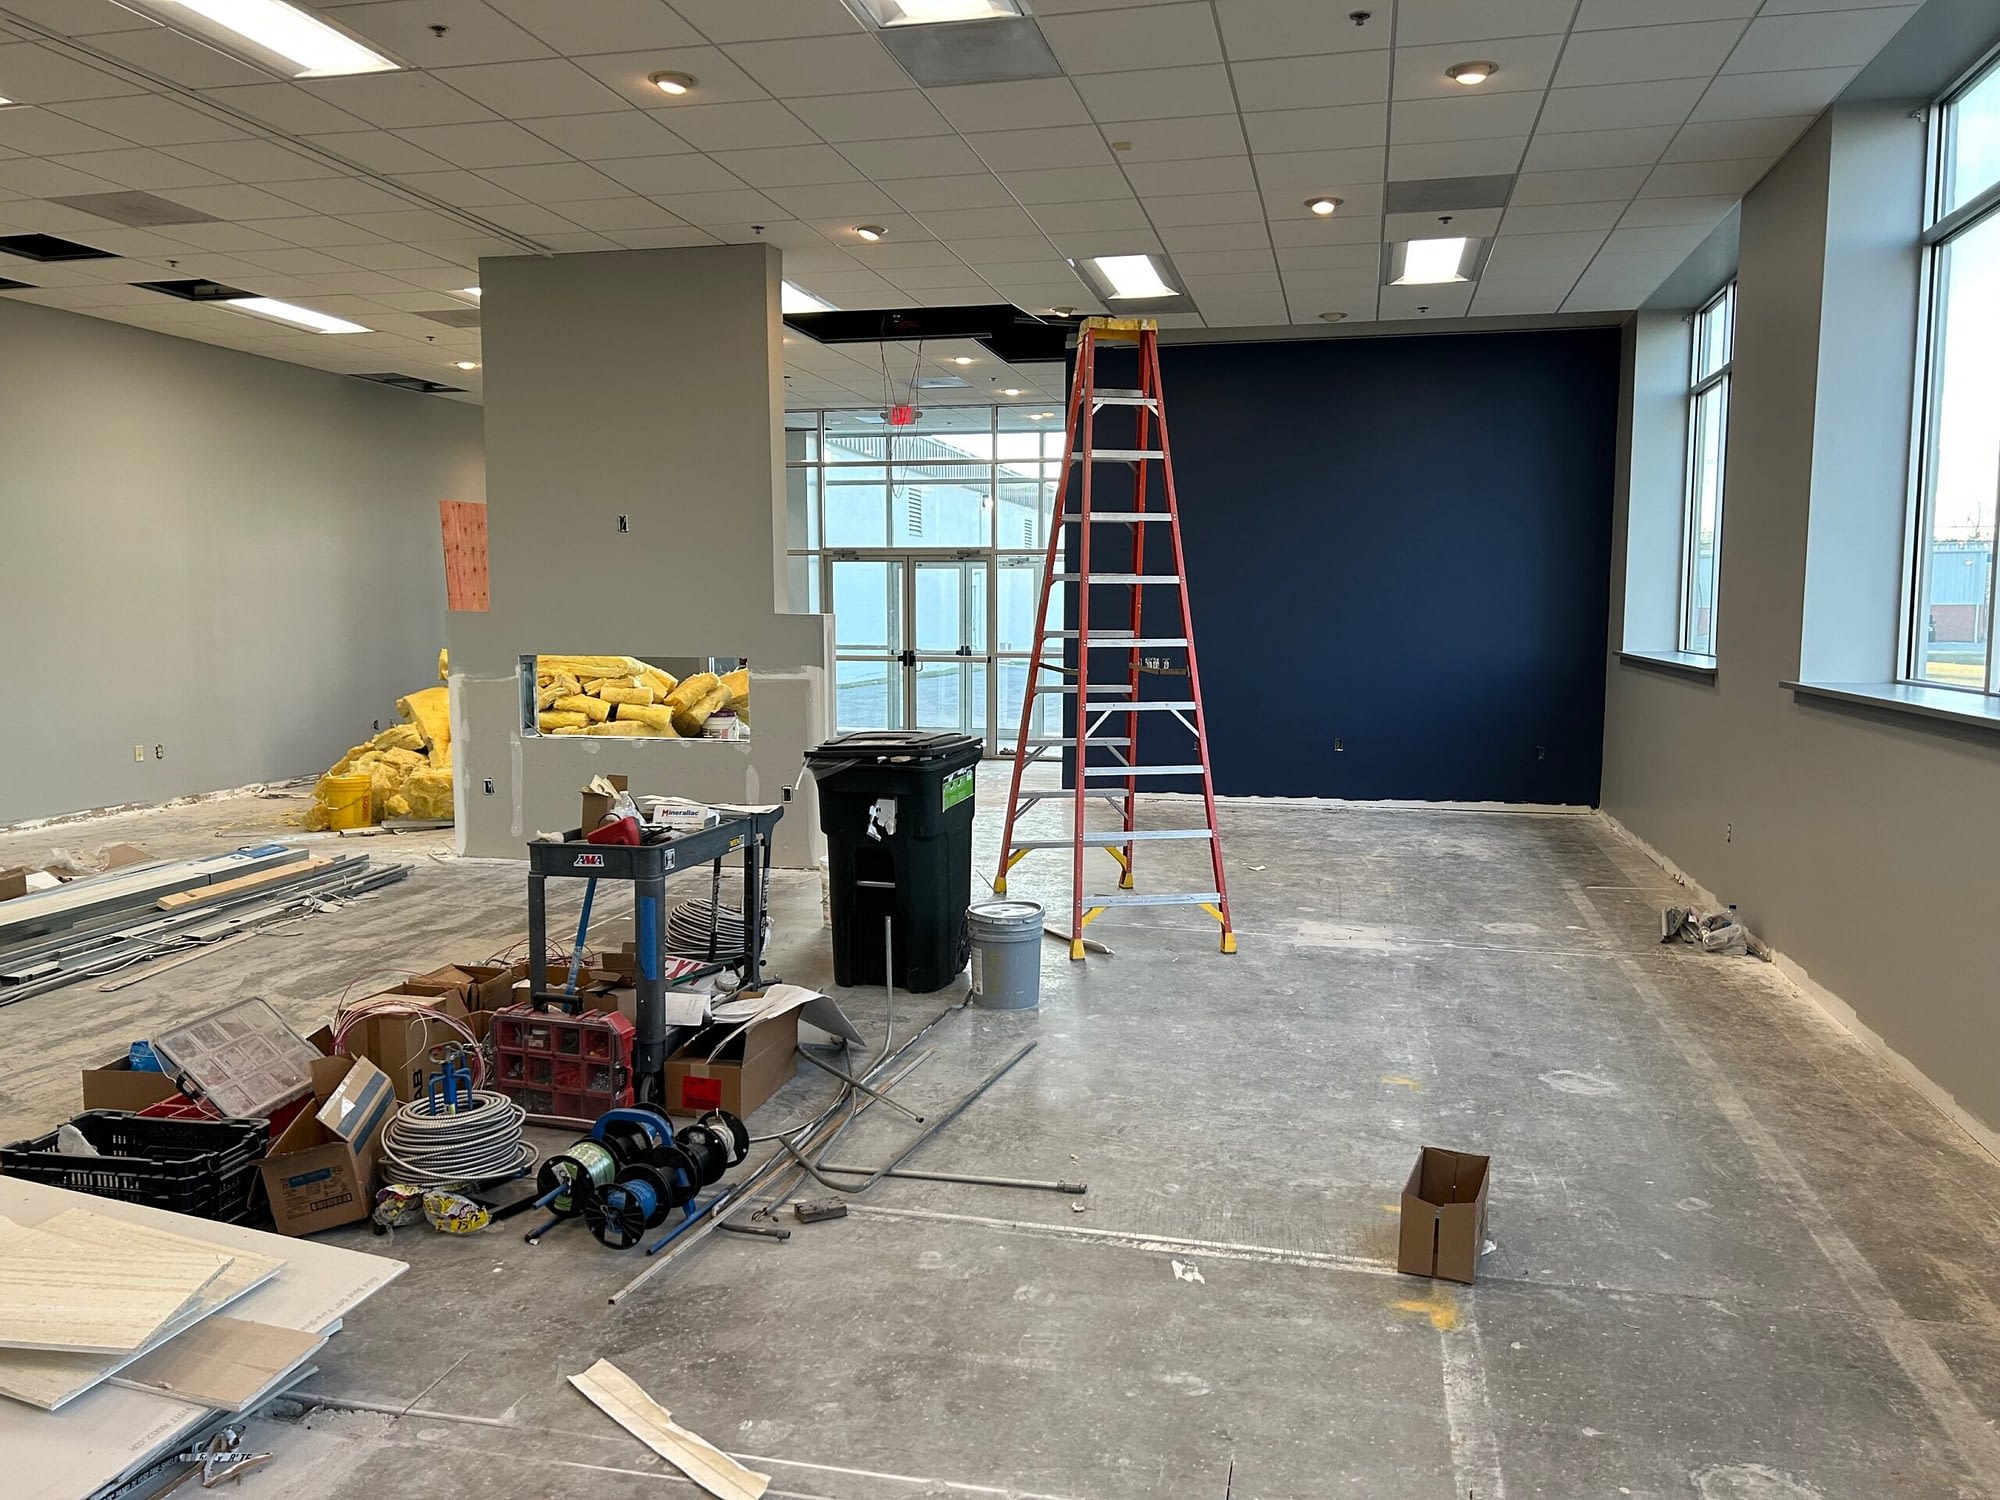 photo of construction in progress in the new showroom with ladders, equipment, a freshly painted wall, and a fireplace in progress